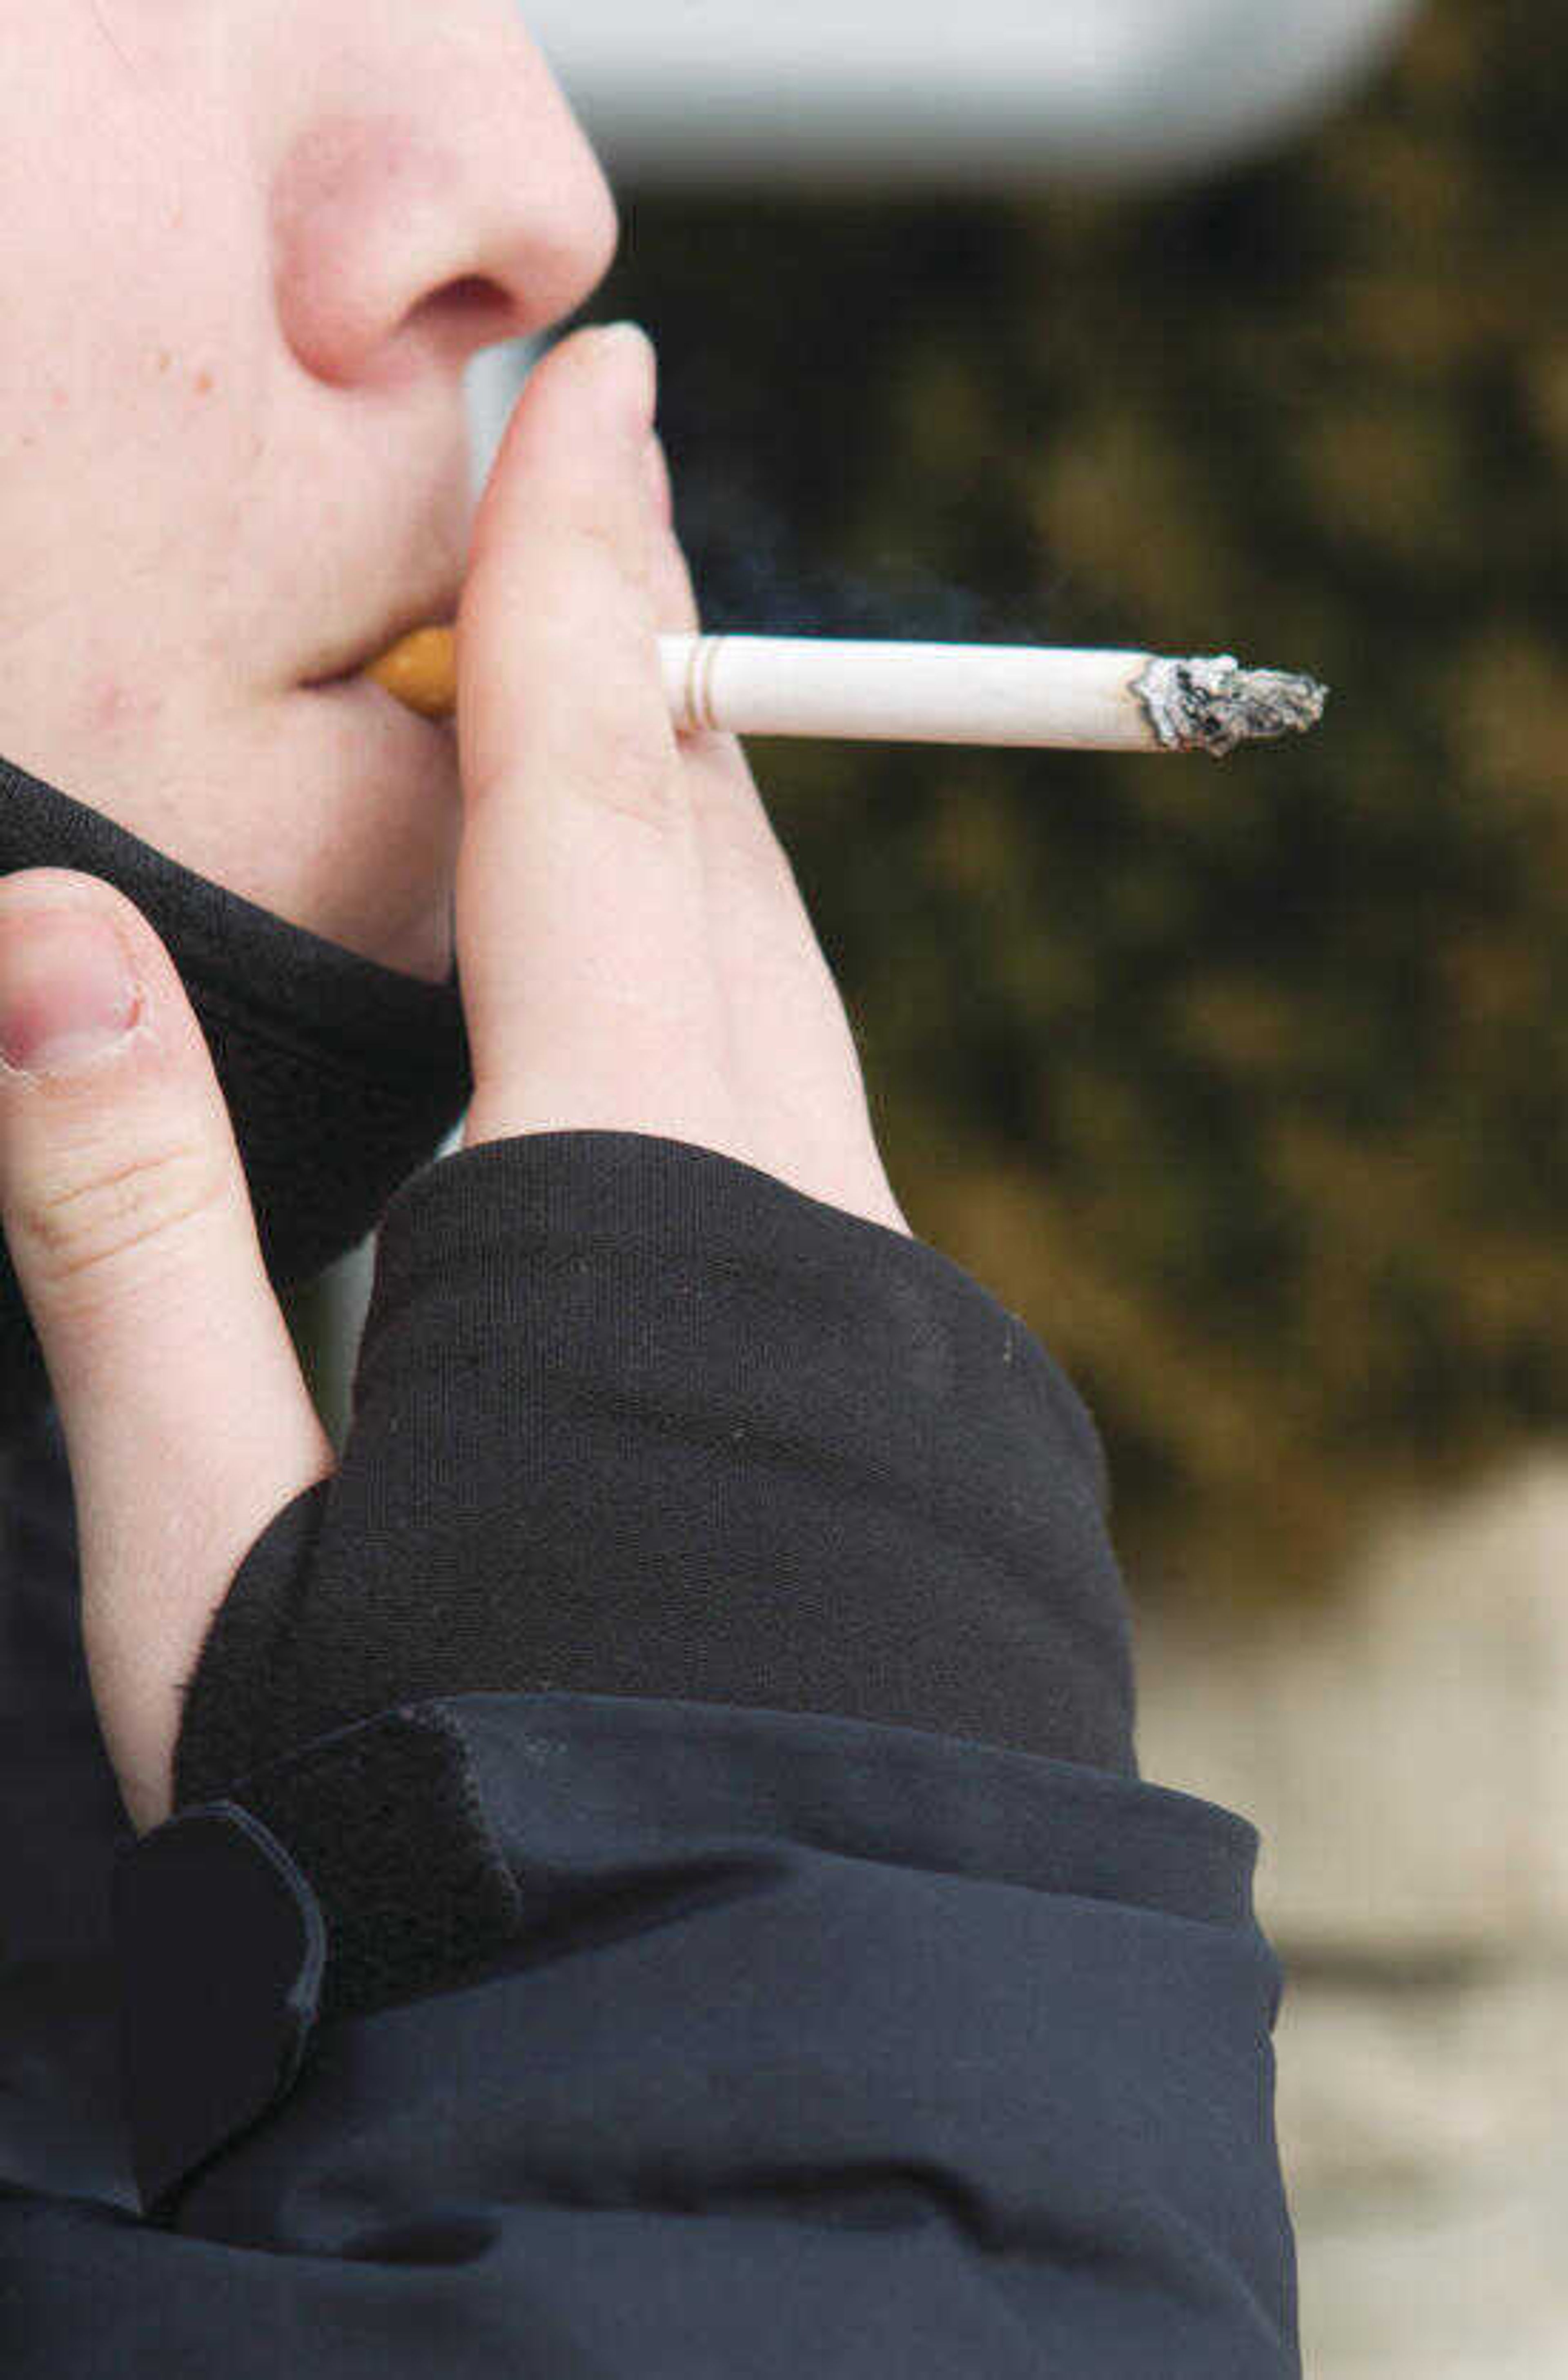 A student smokes outside of Grauel building.